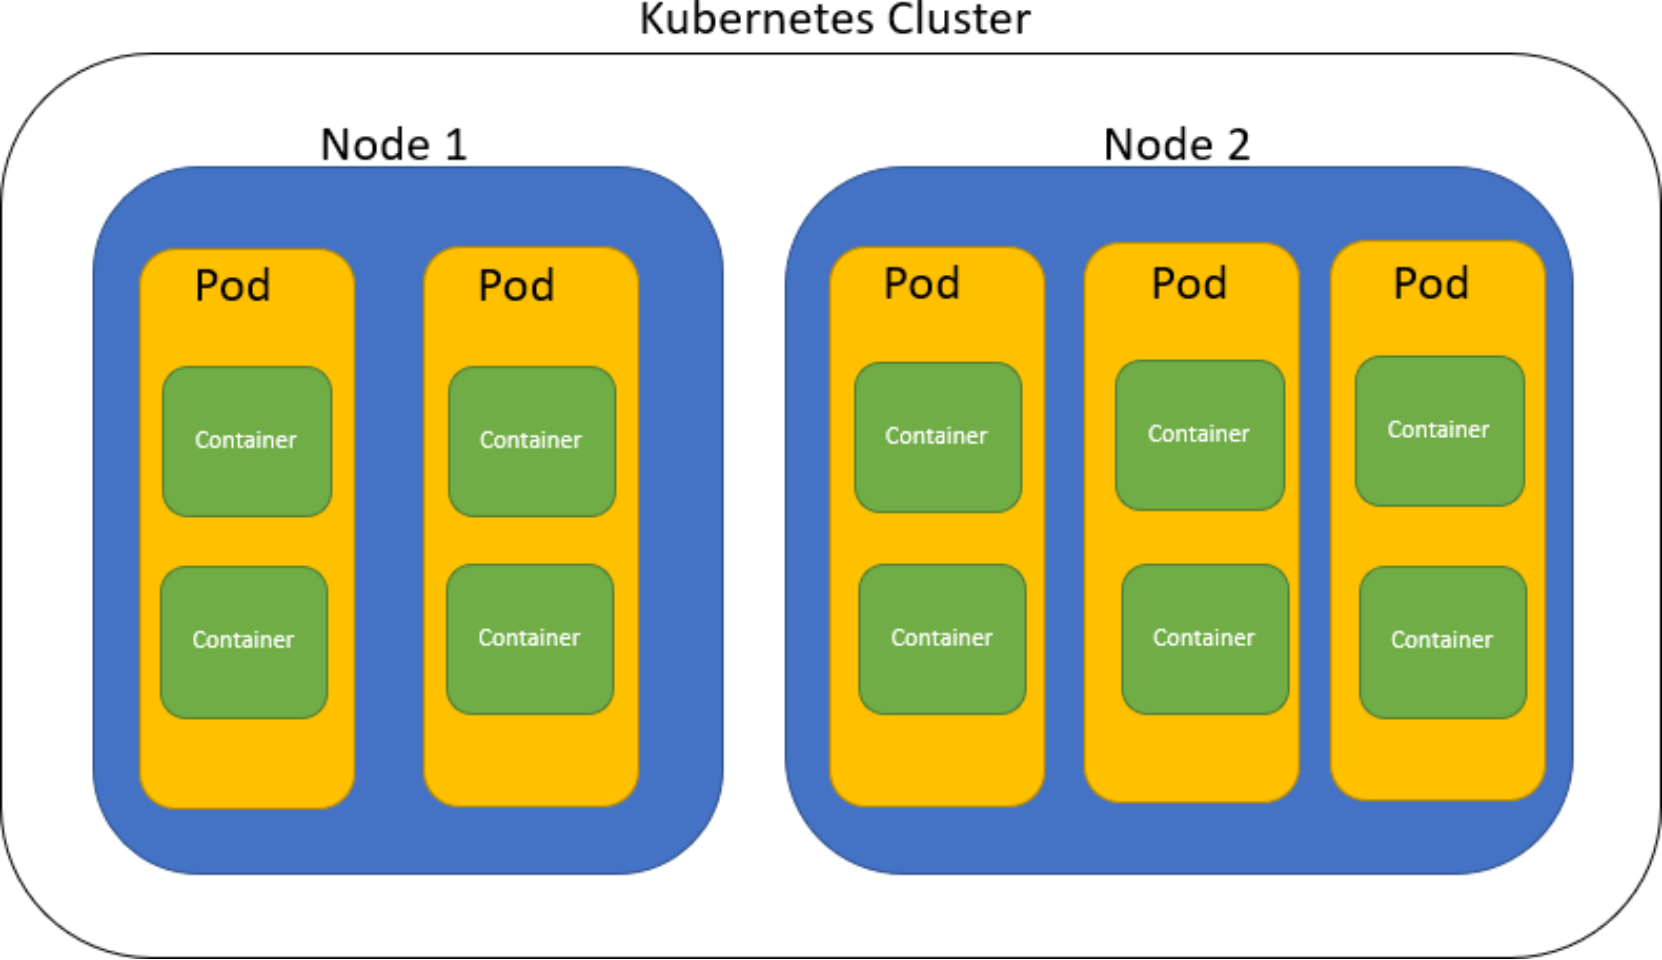 This image shows the overview of Kubernetes cluster nodes along with pods and containers.